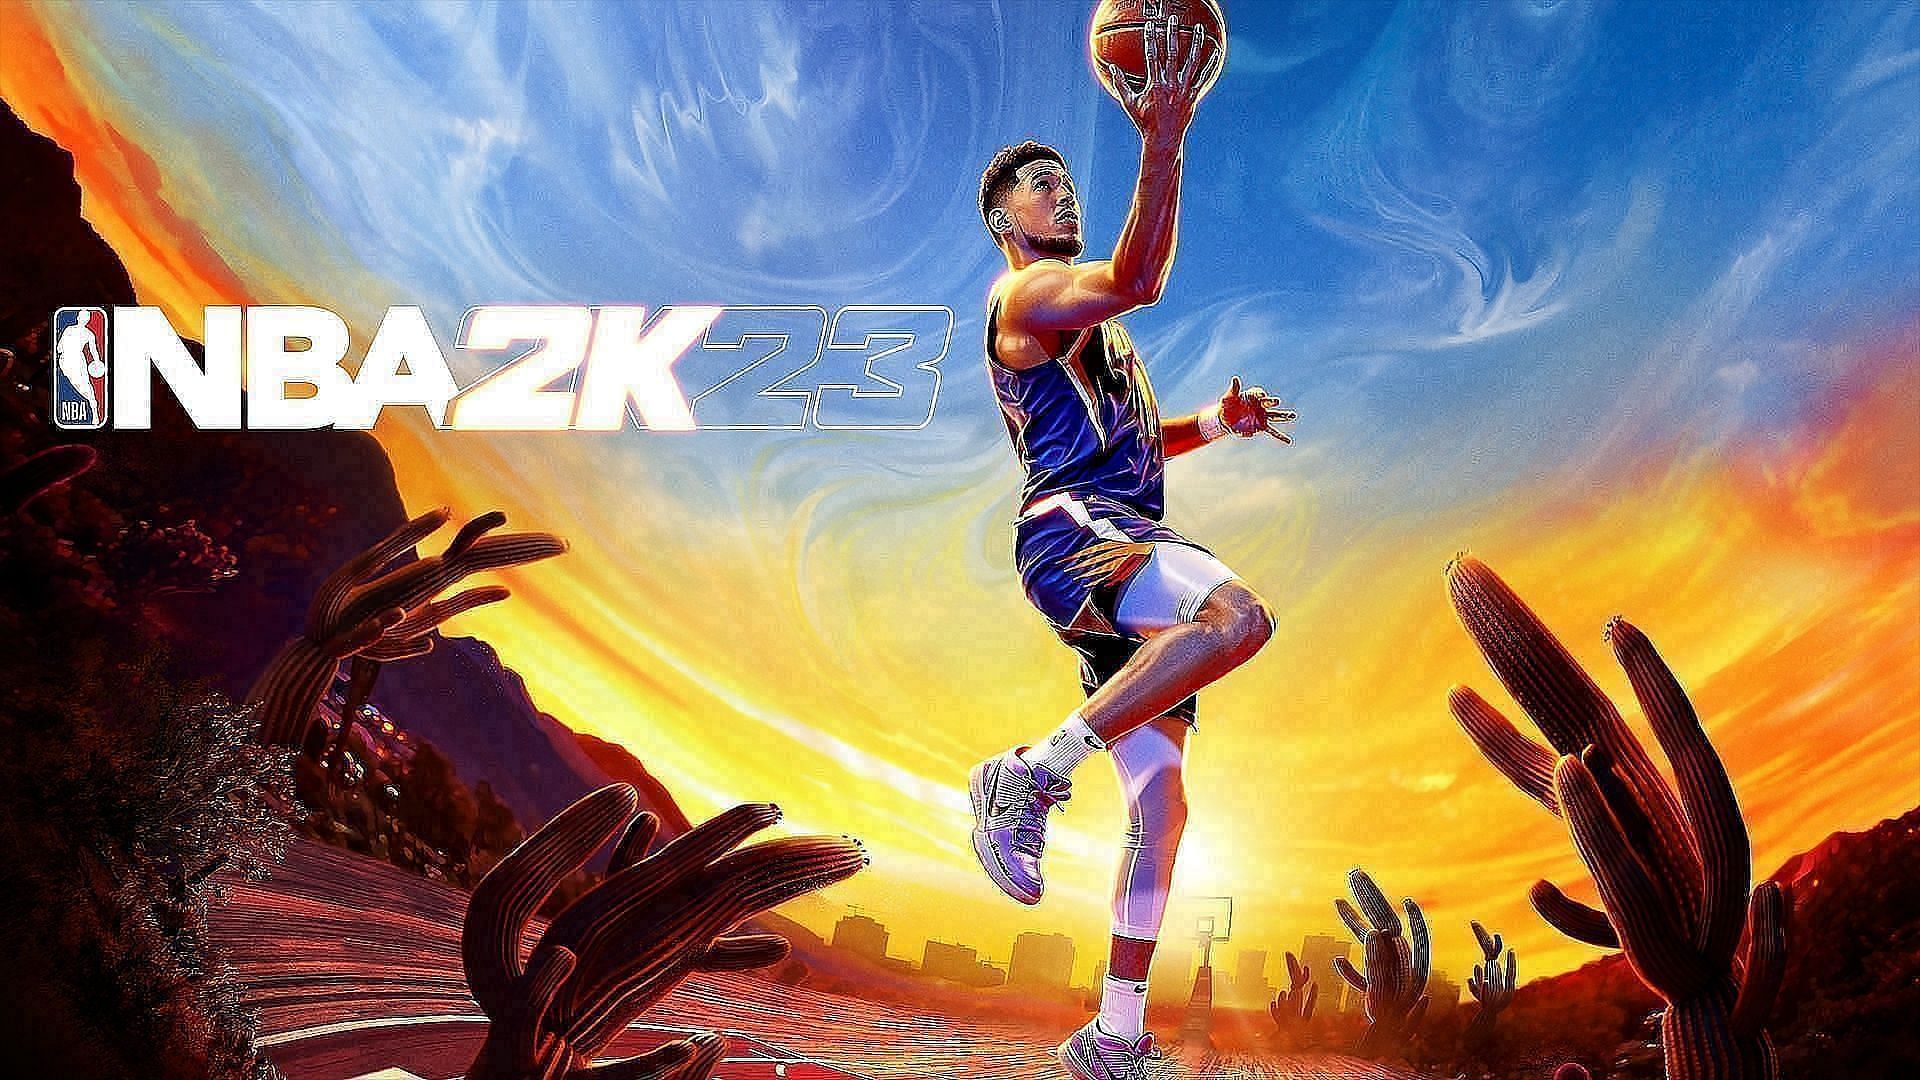 NBA 2K23 has quite a few activities that are not related to basketball.